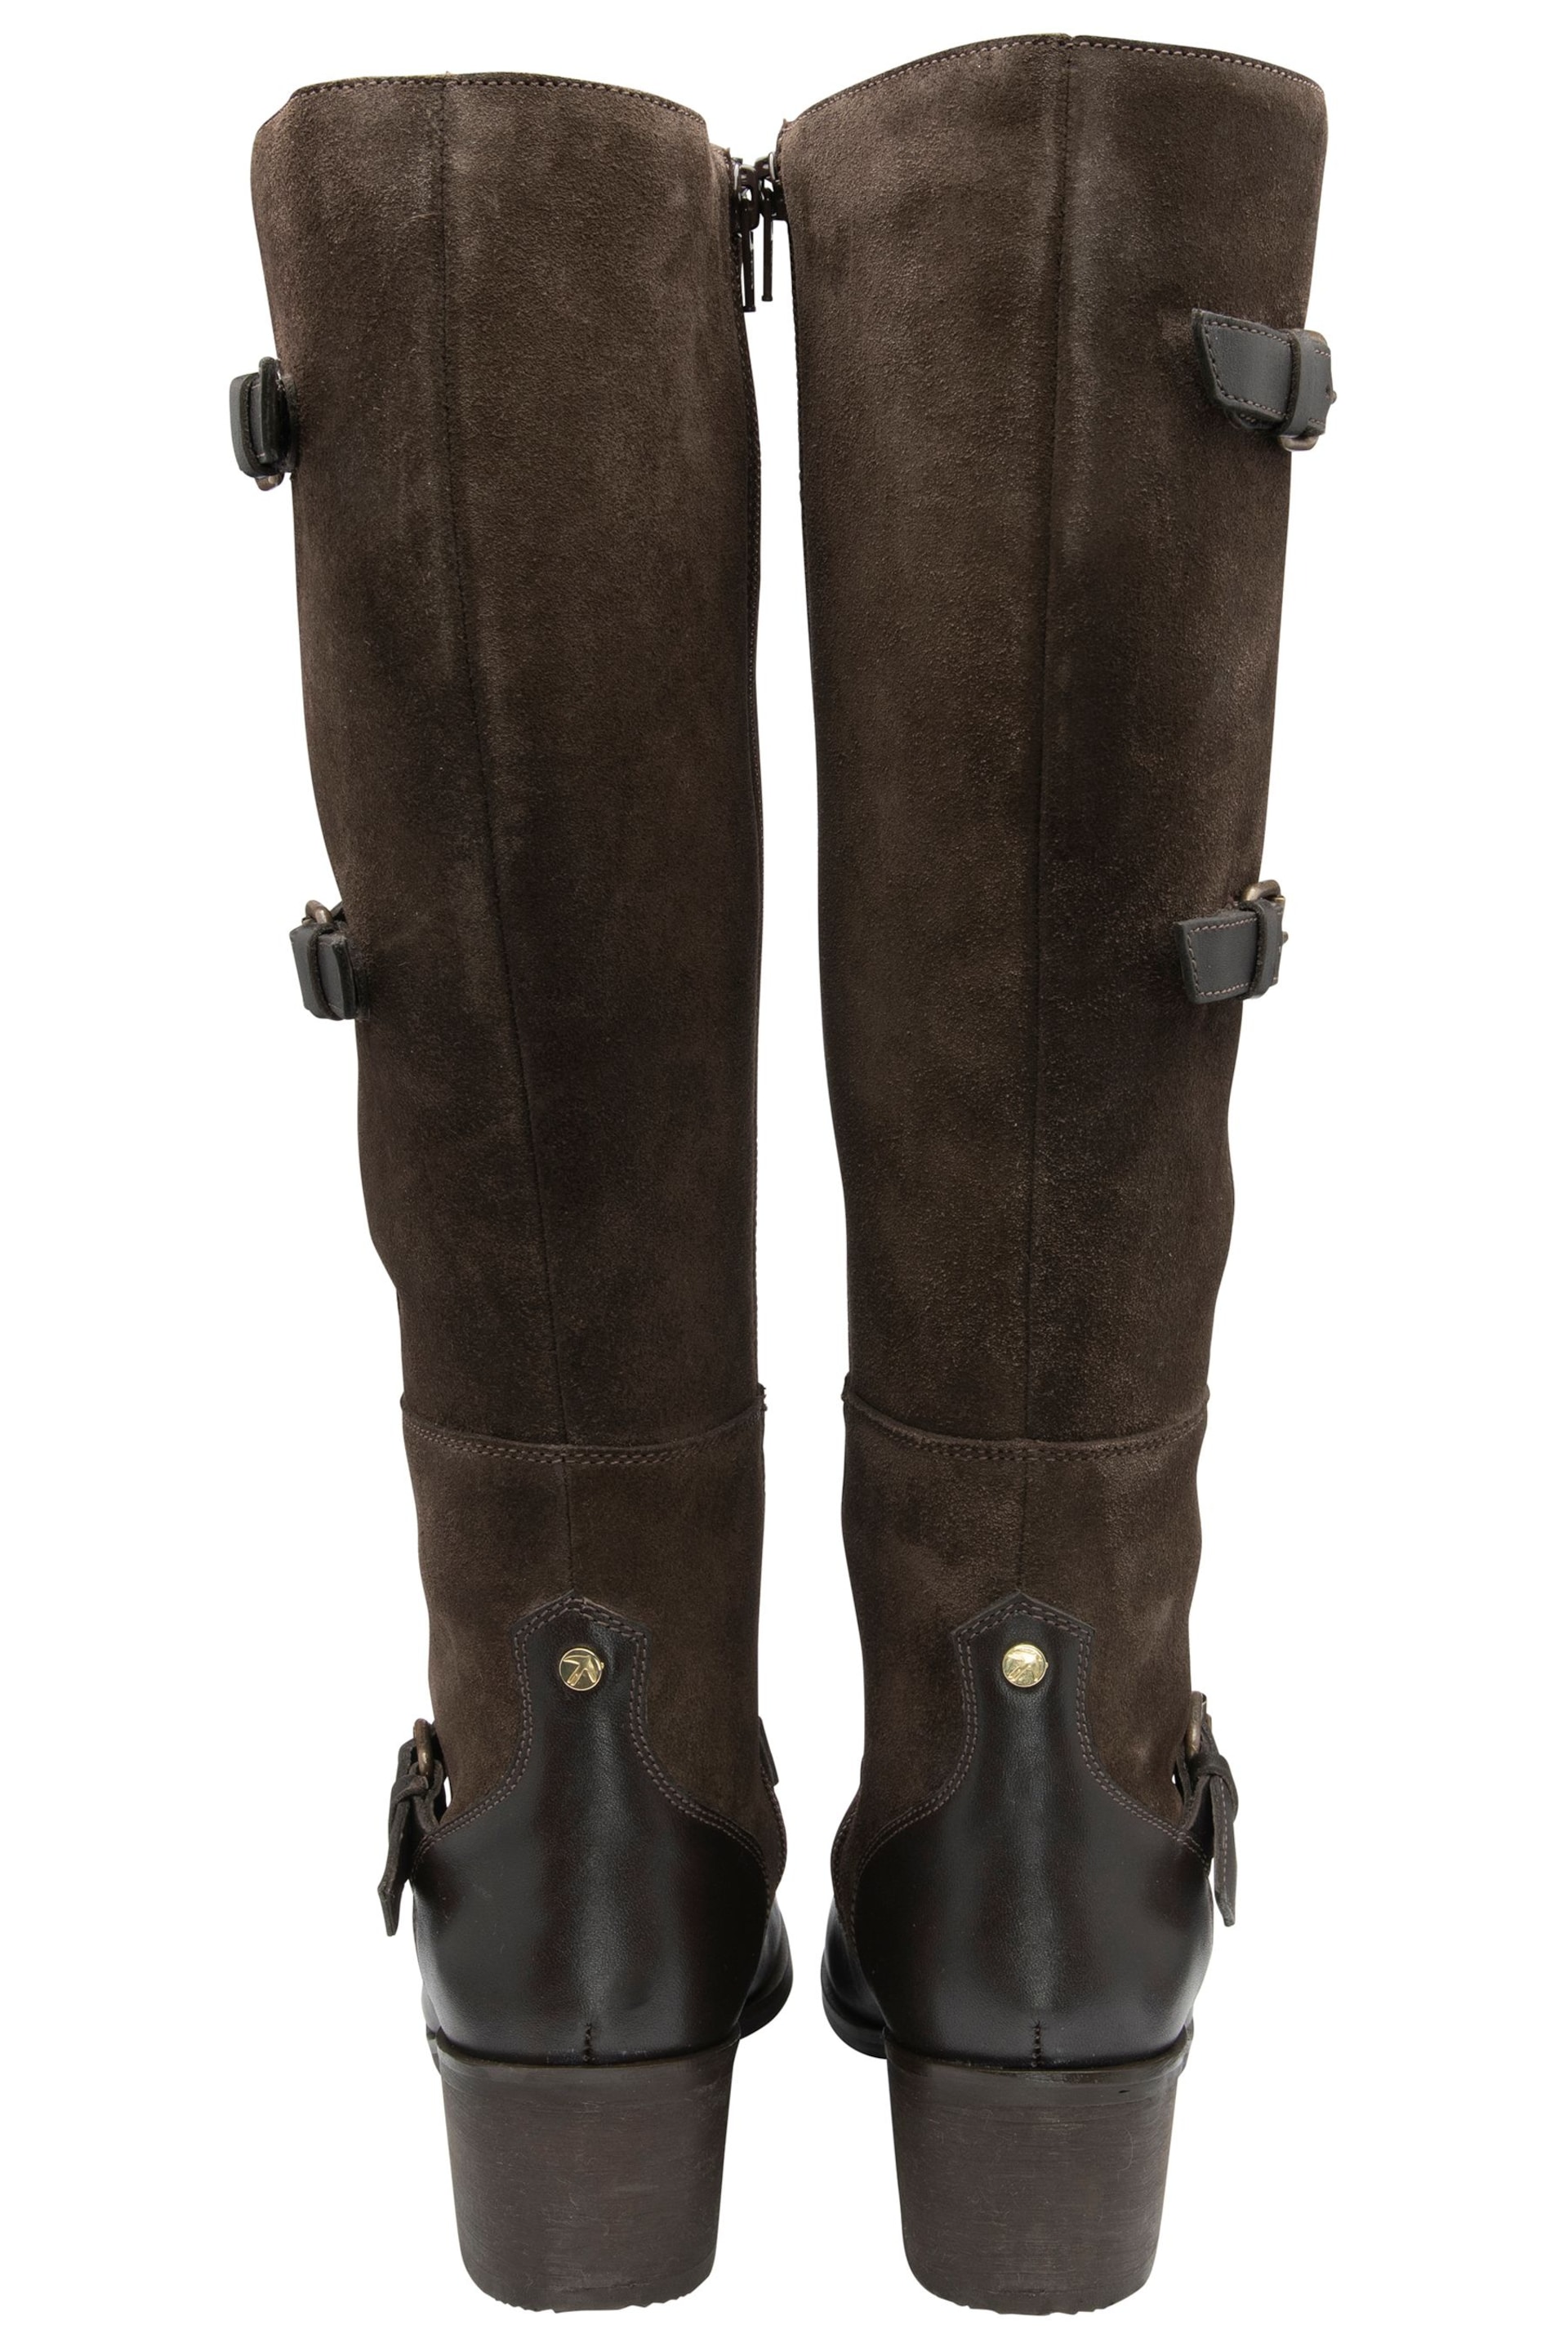 Ravel Brown Leather & Suede Zip-Up Knee High Boots - Image 3 of 4